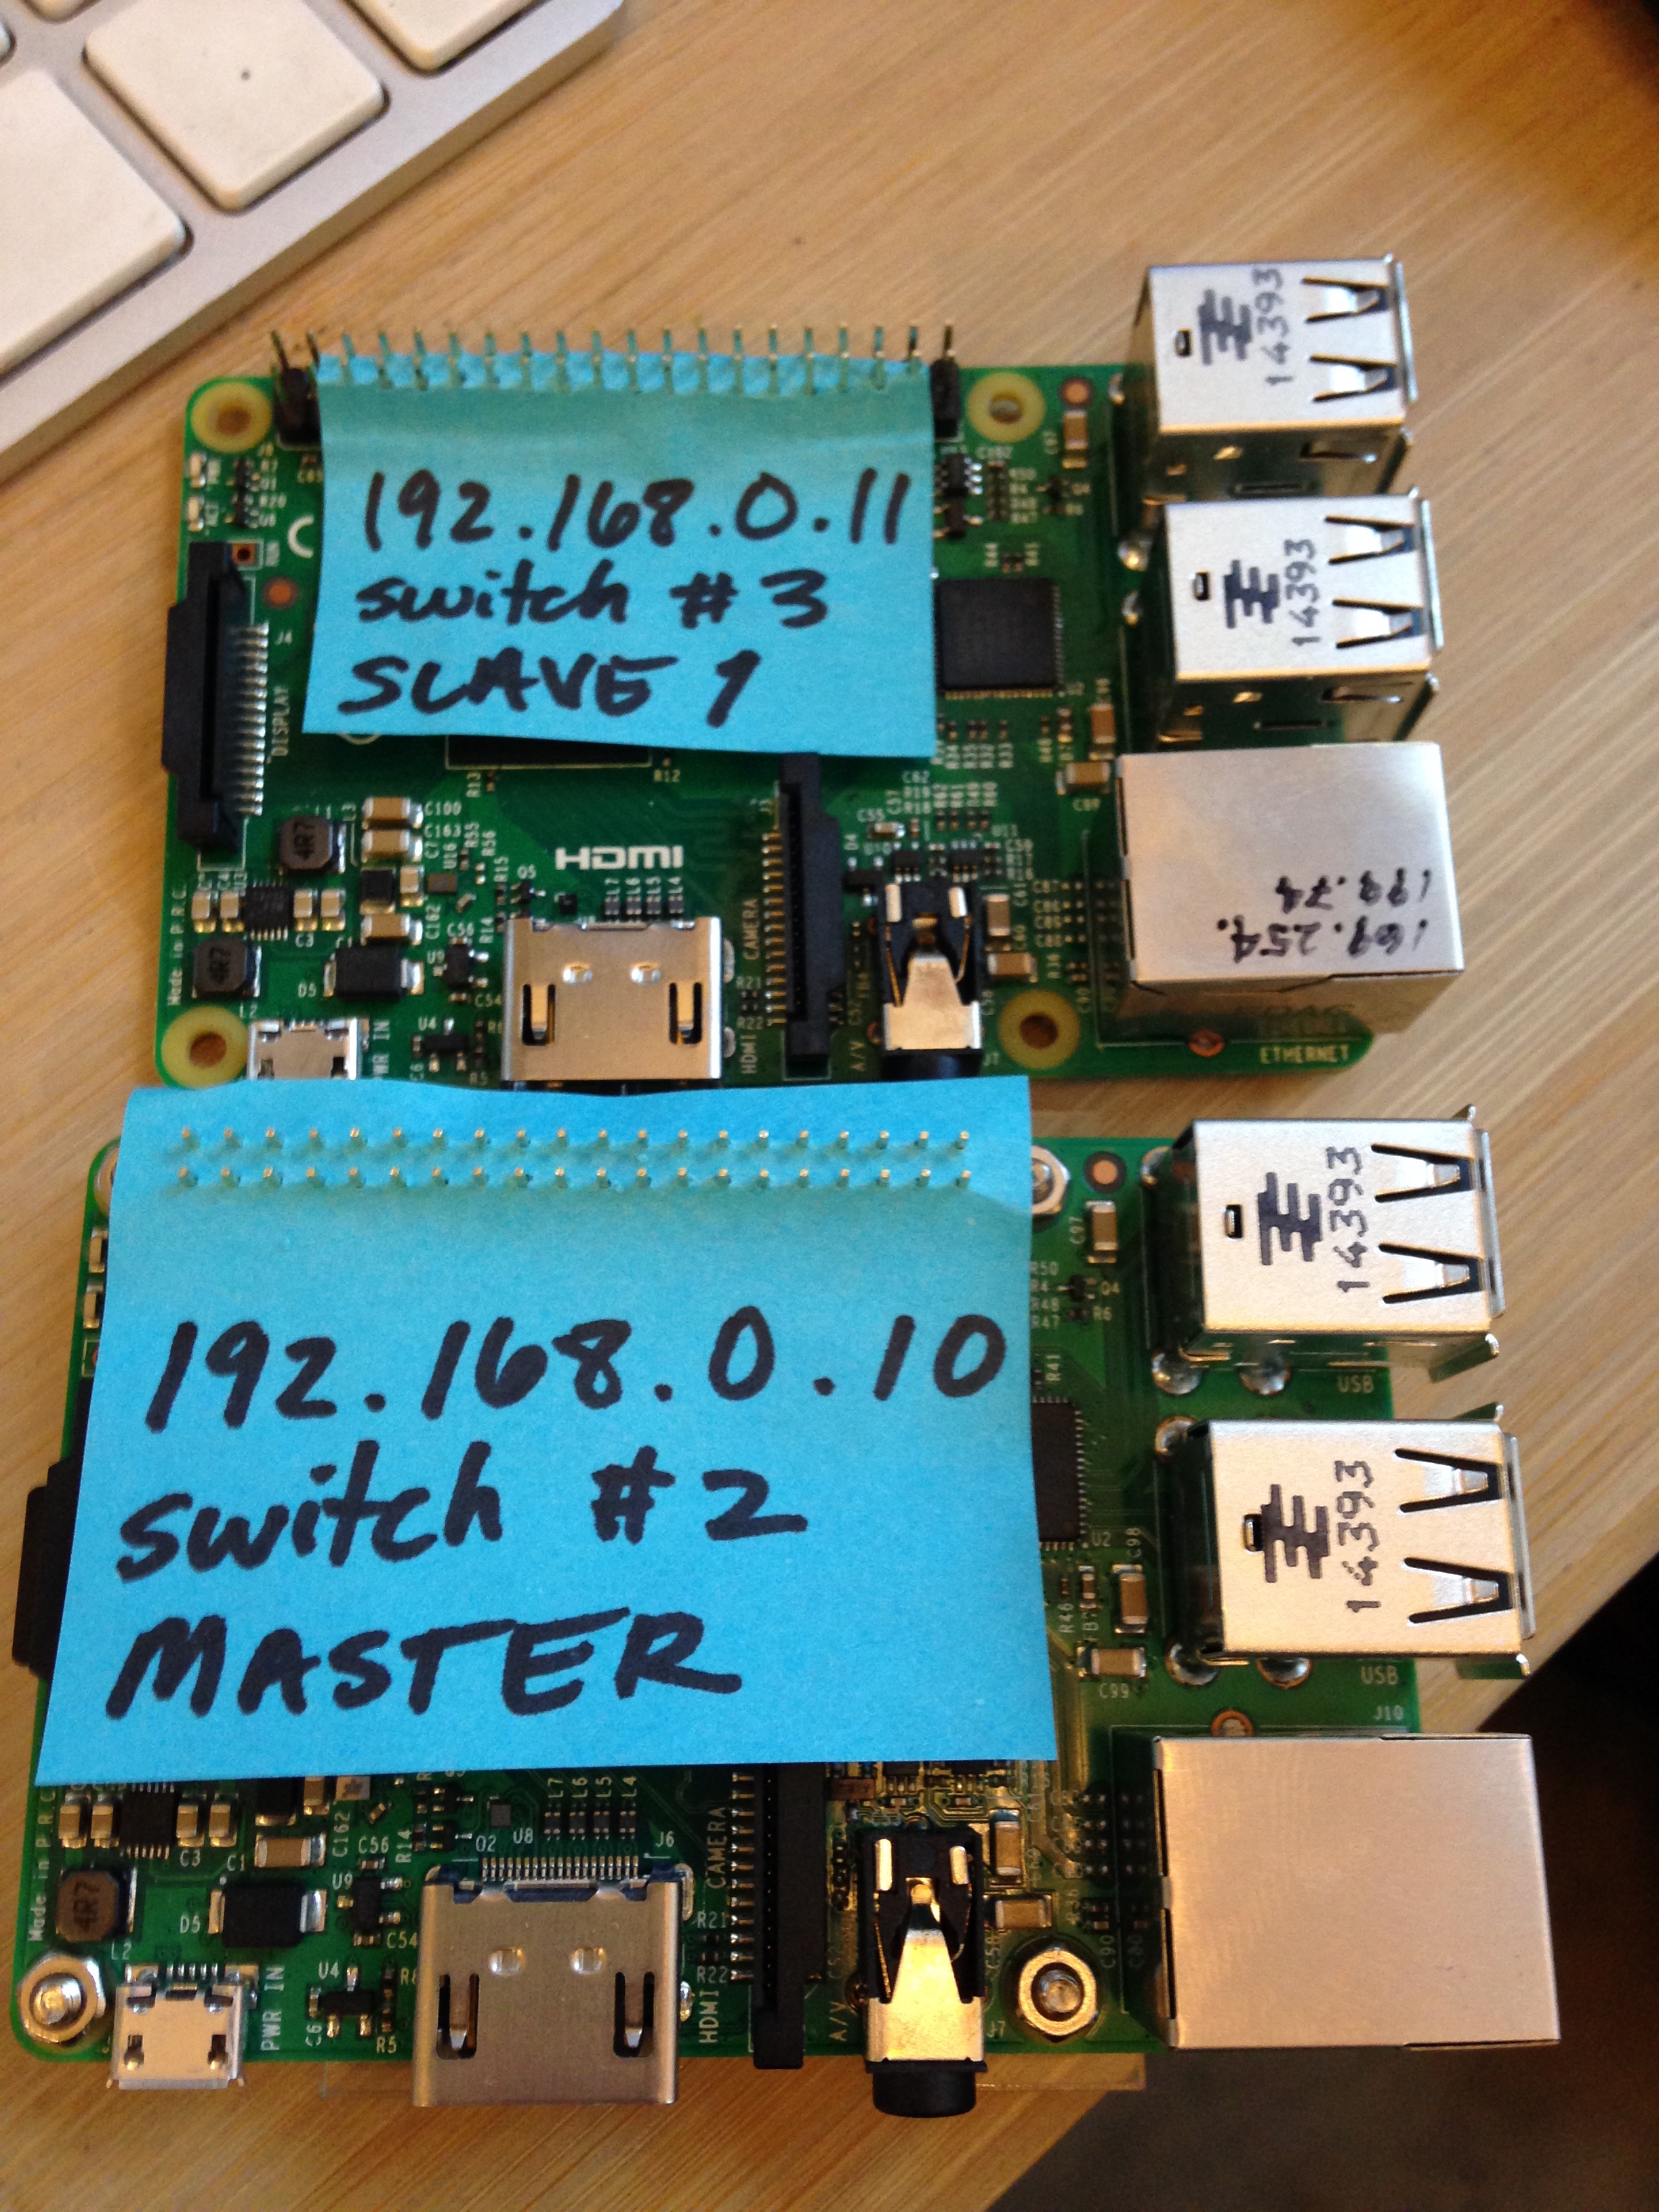 Pi's with sticky notes attached